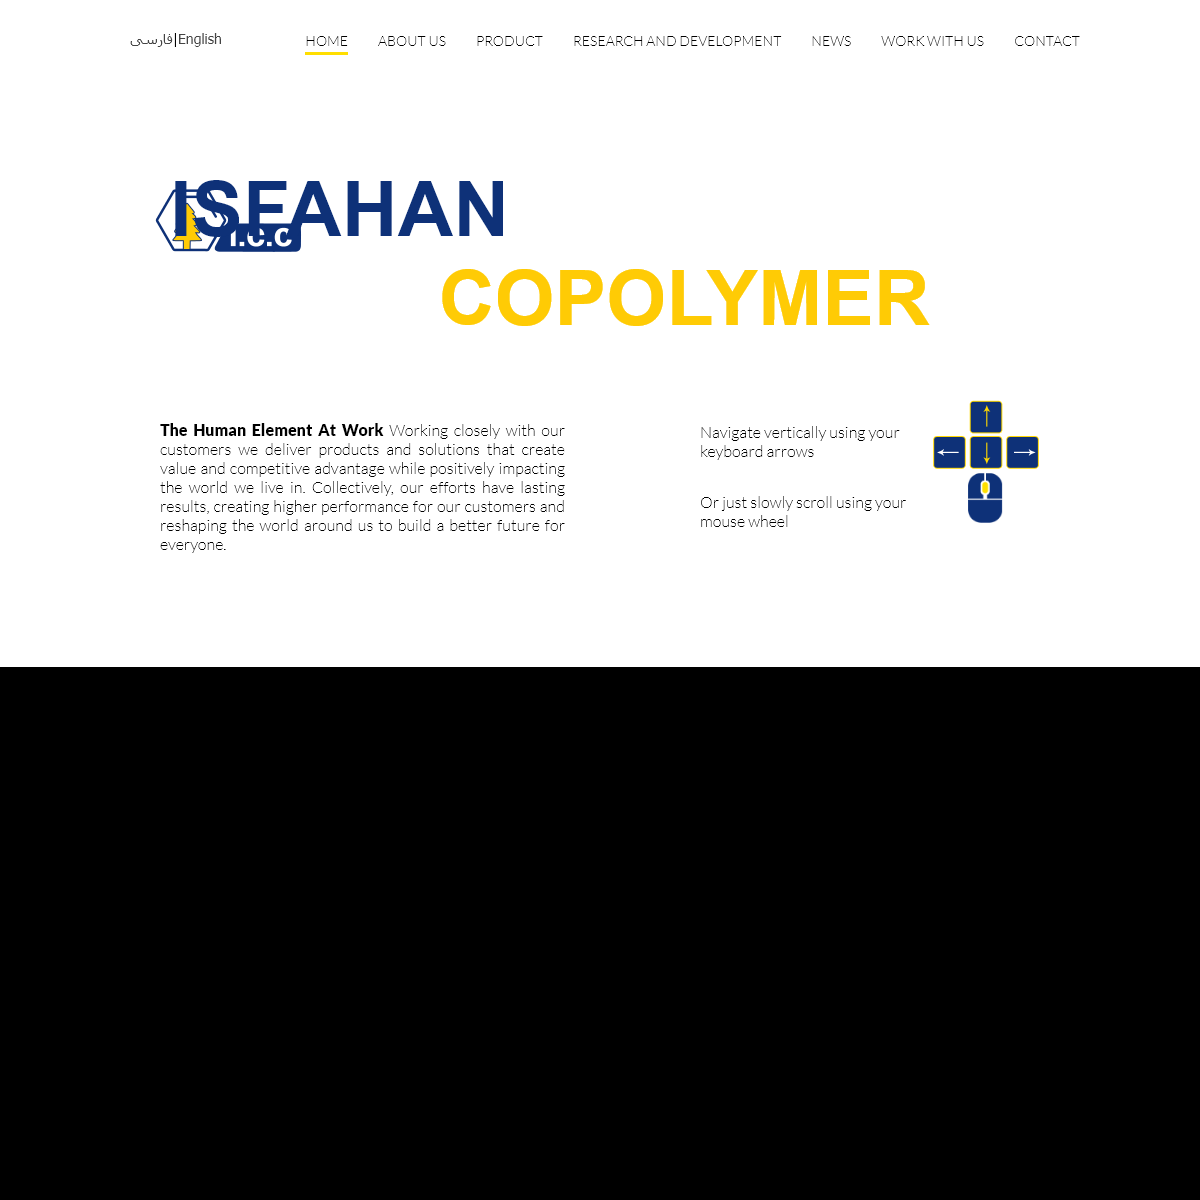 A complete backup of isfahancopolymer.com